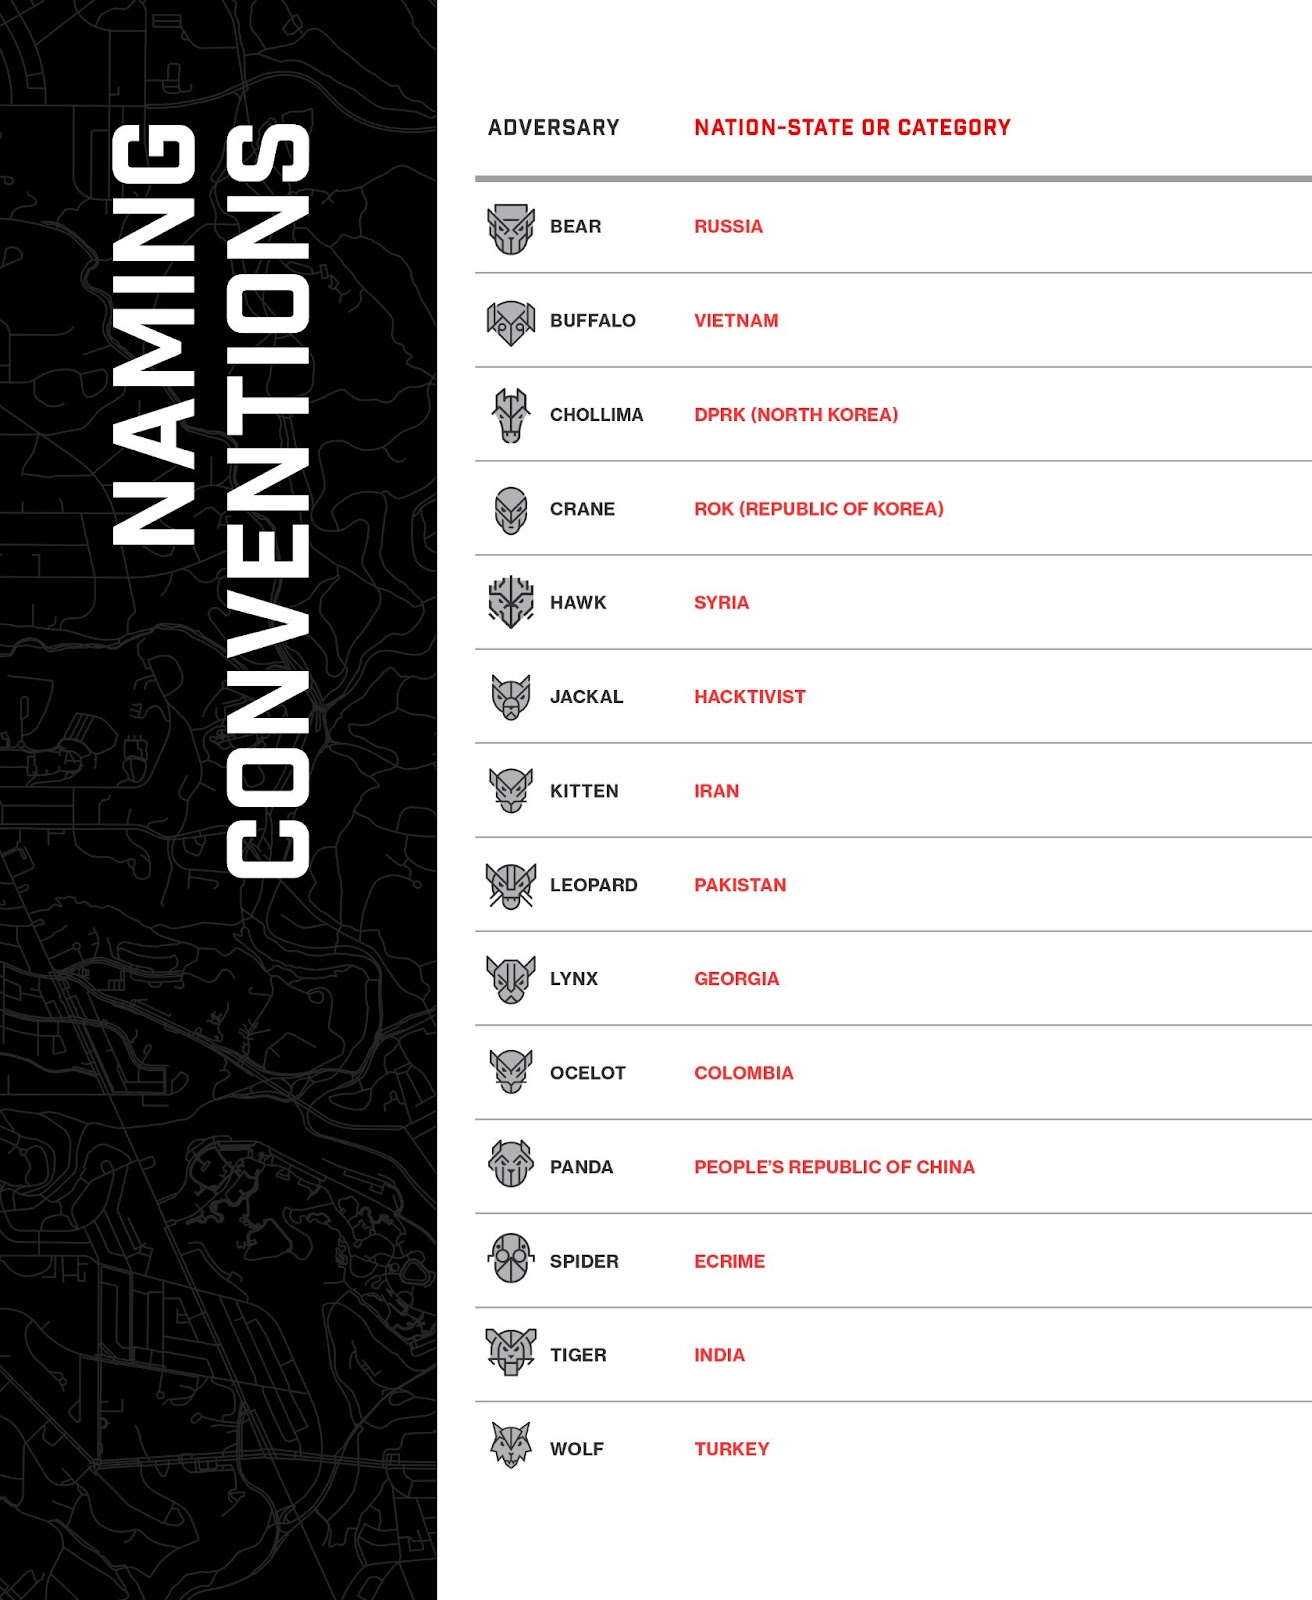 2023 CrowdStrike Global Threat Report Reveals Sophisticated Adversaries Re-exploiting and Re-weaponizing Patched Vulnerabilities and Moving Beyond Ransomware